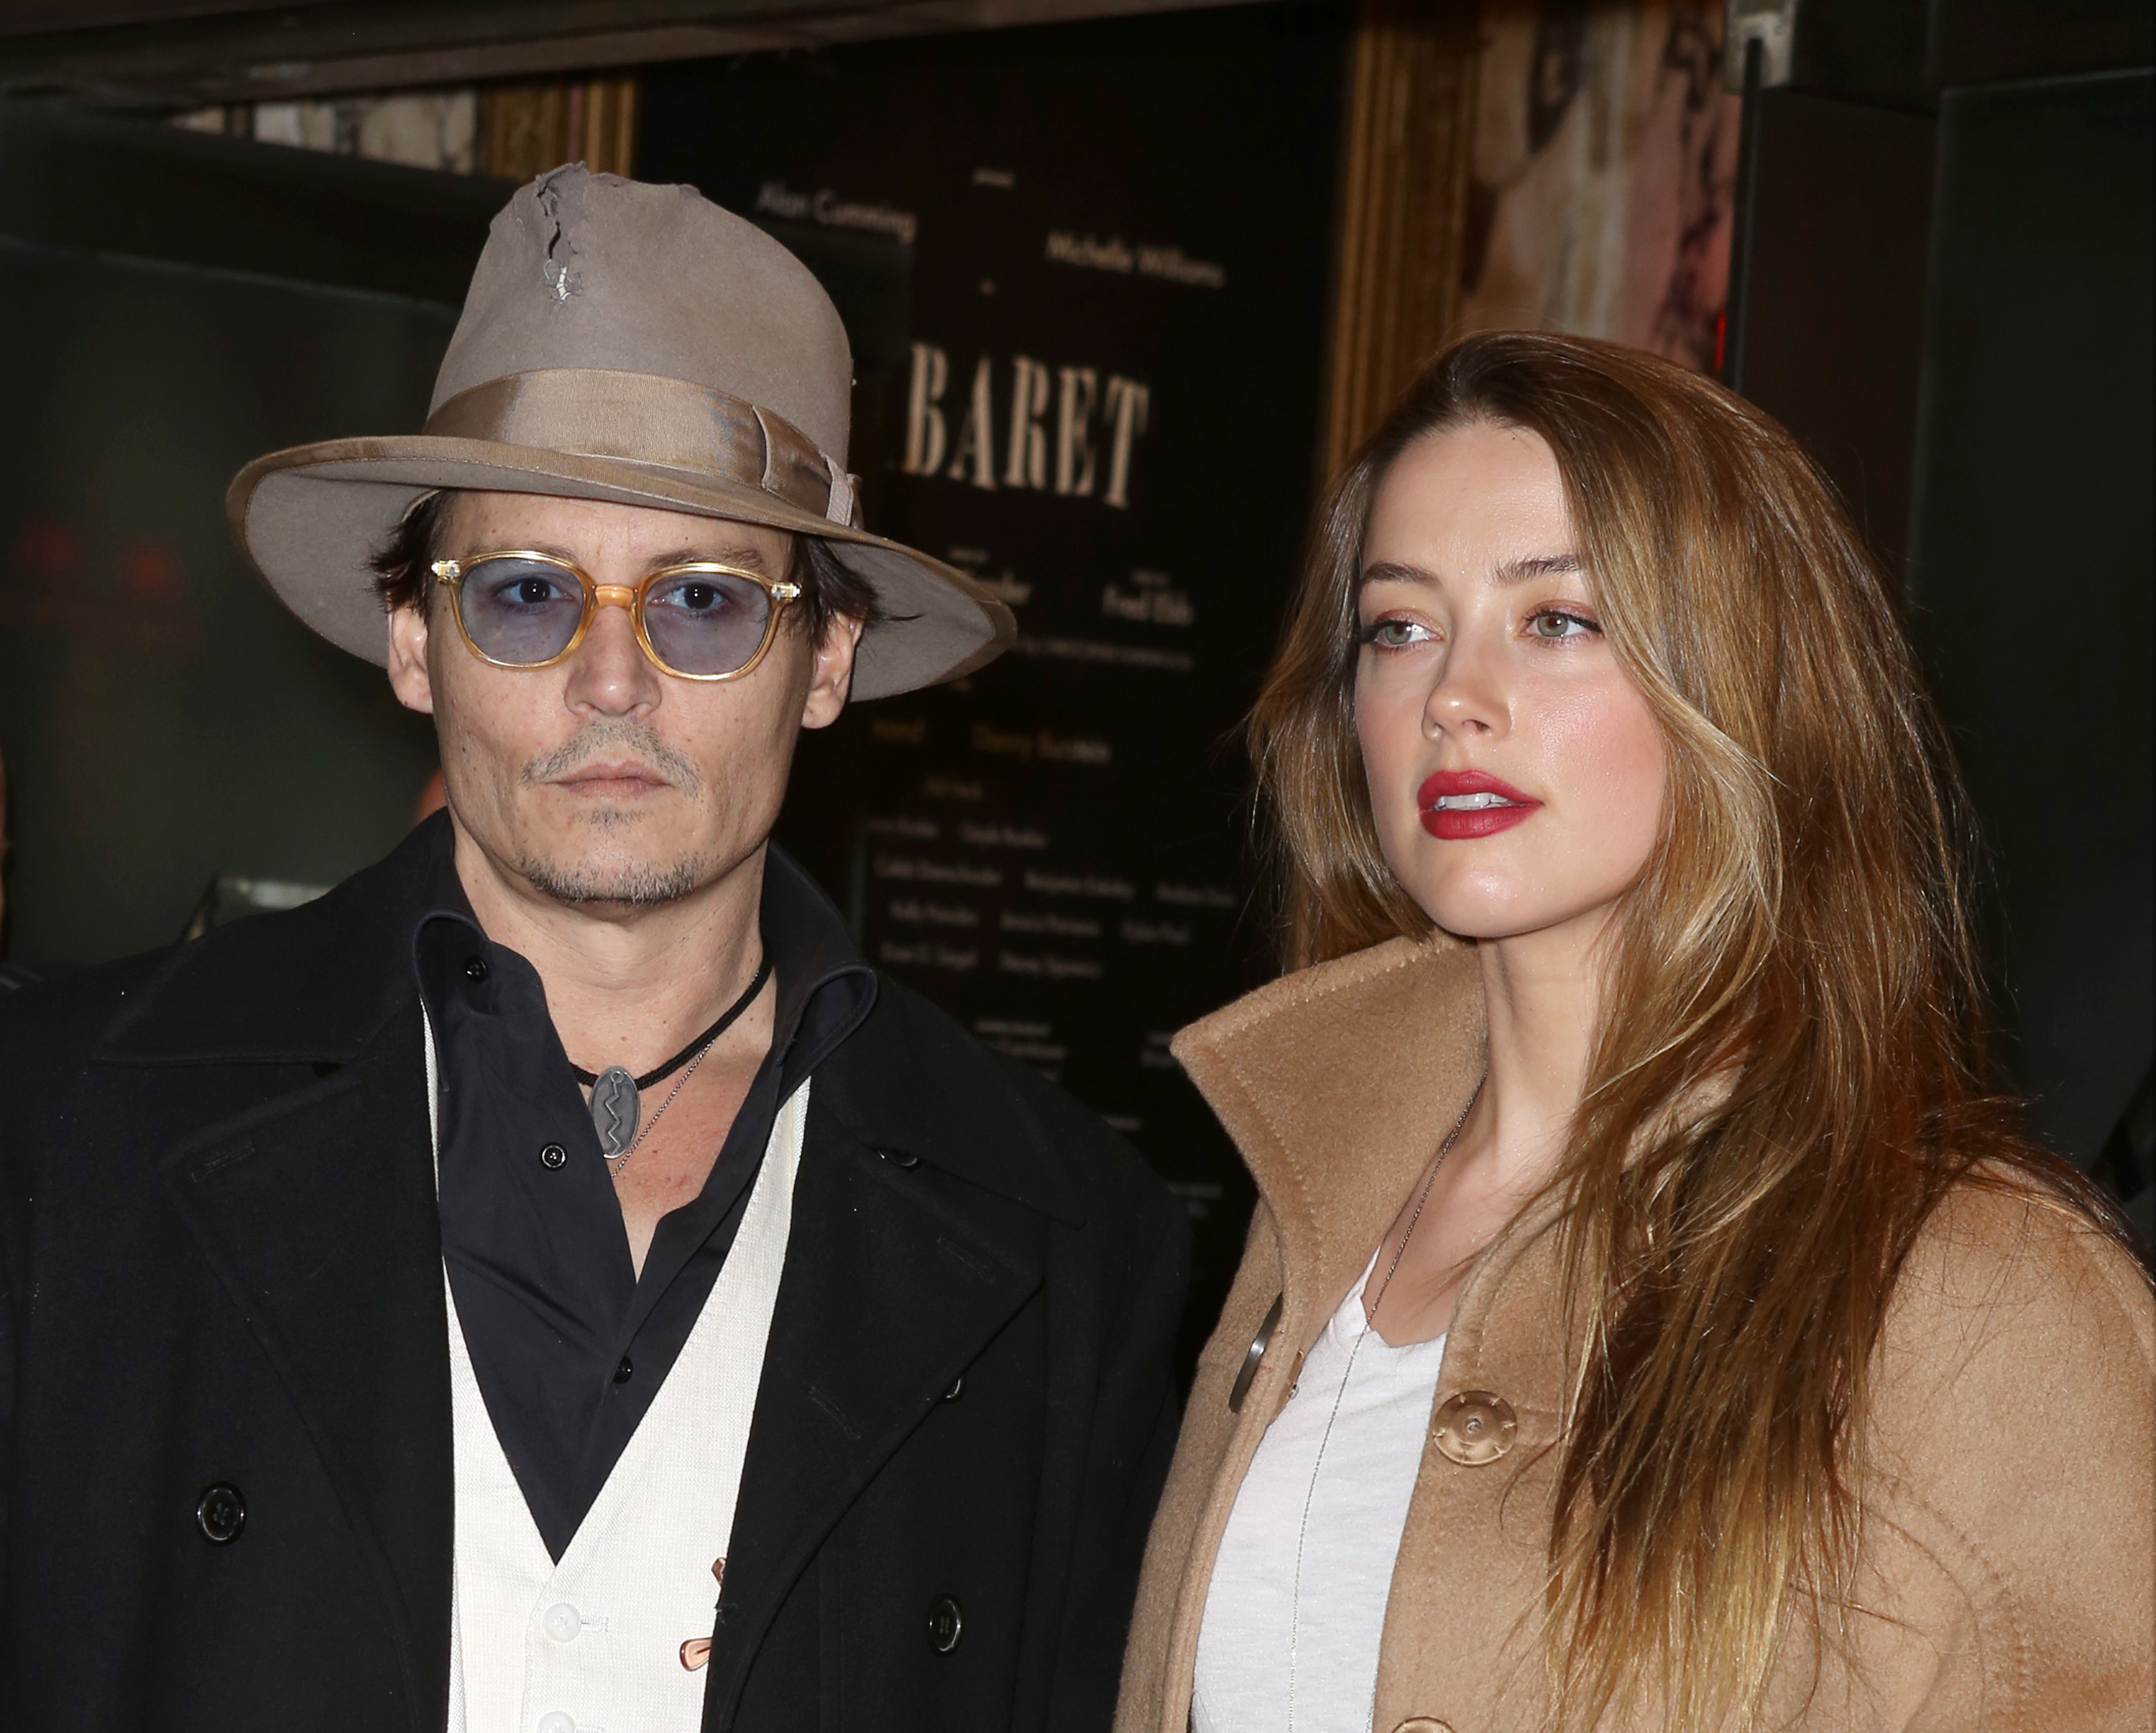 Johnny Depp and Amber Heard attending the Broadway Opening Night Performance of "Cabaret" at Studio 54 on April 24, 2014, in New York City. | Source: Getty Images